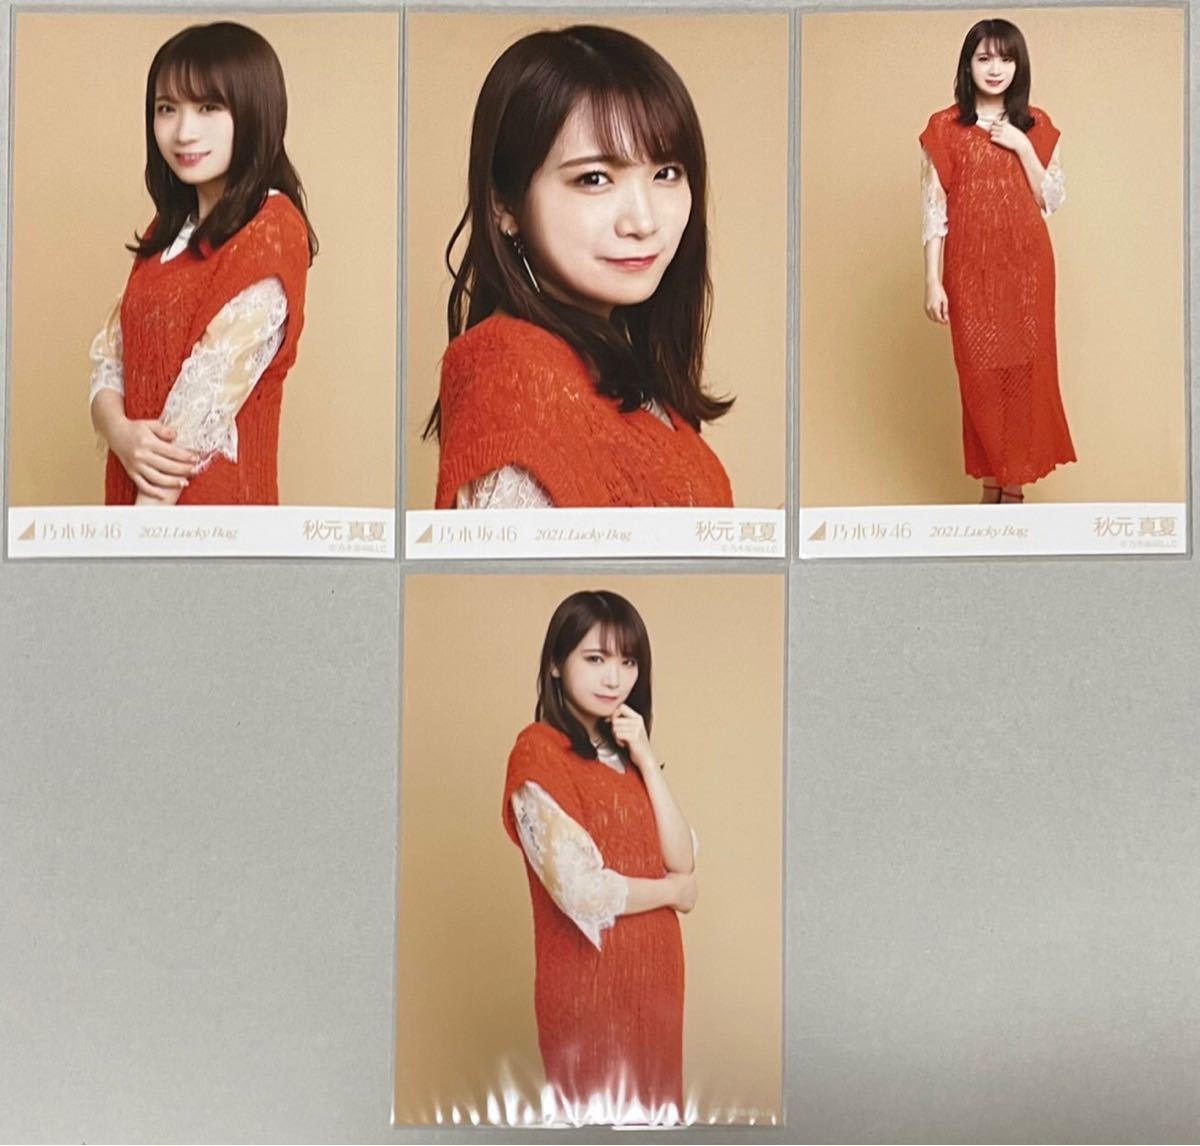  Nogizaka 46 autumn origin genuine summer WEB SHOP limitation 2021 Lucky Bag lucky bag 3 kind not for sale delay ... life photograph 4 sheets comp inspection )yolichuuhiki1 period raw 